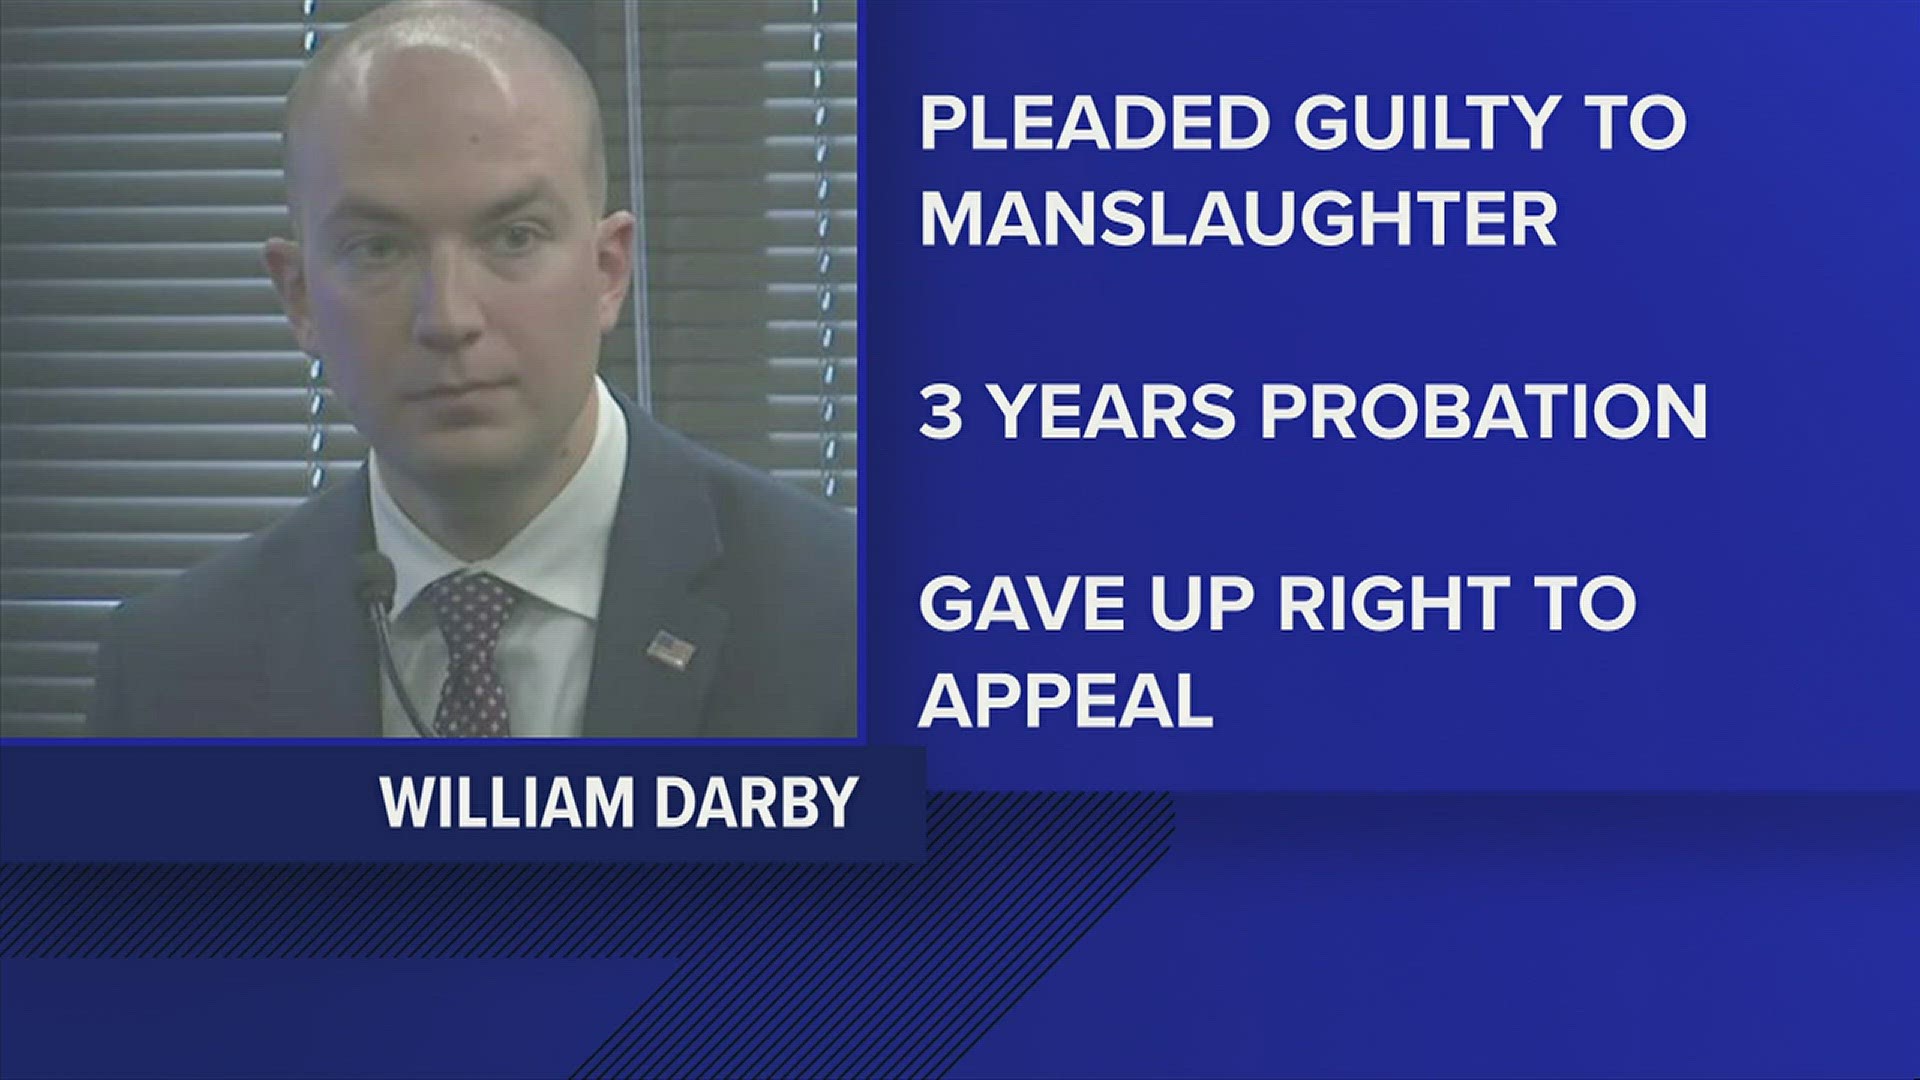 William Darby was convicted of murder in the 2018 shooting death of a suicidal man - a conviction which was later overturned.